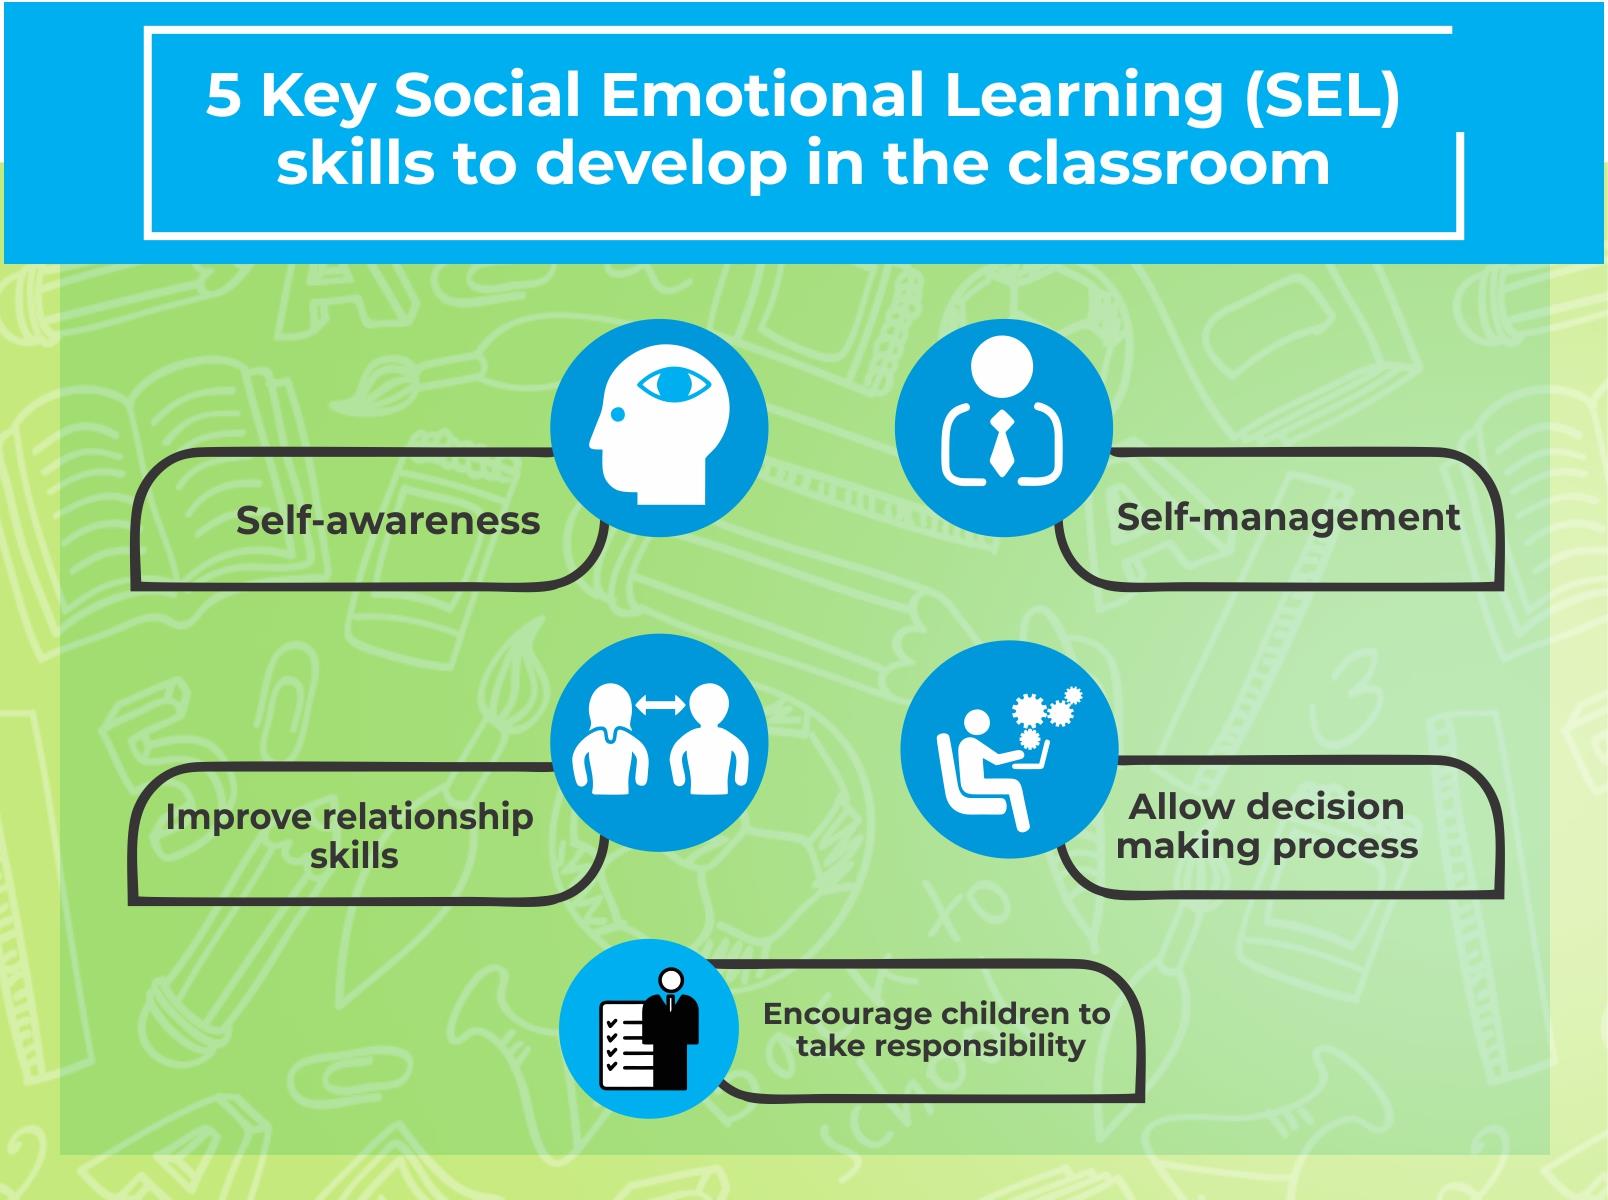 5 Key Social Emotional Learning (SEL) skills to develop in the classroom